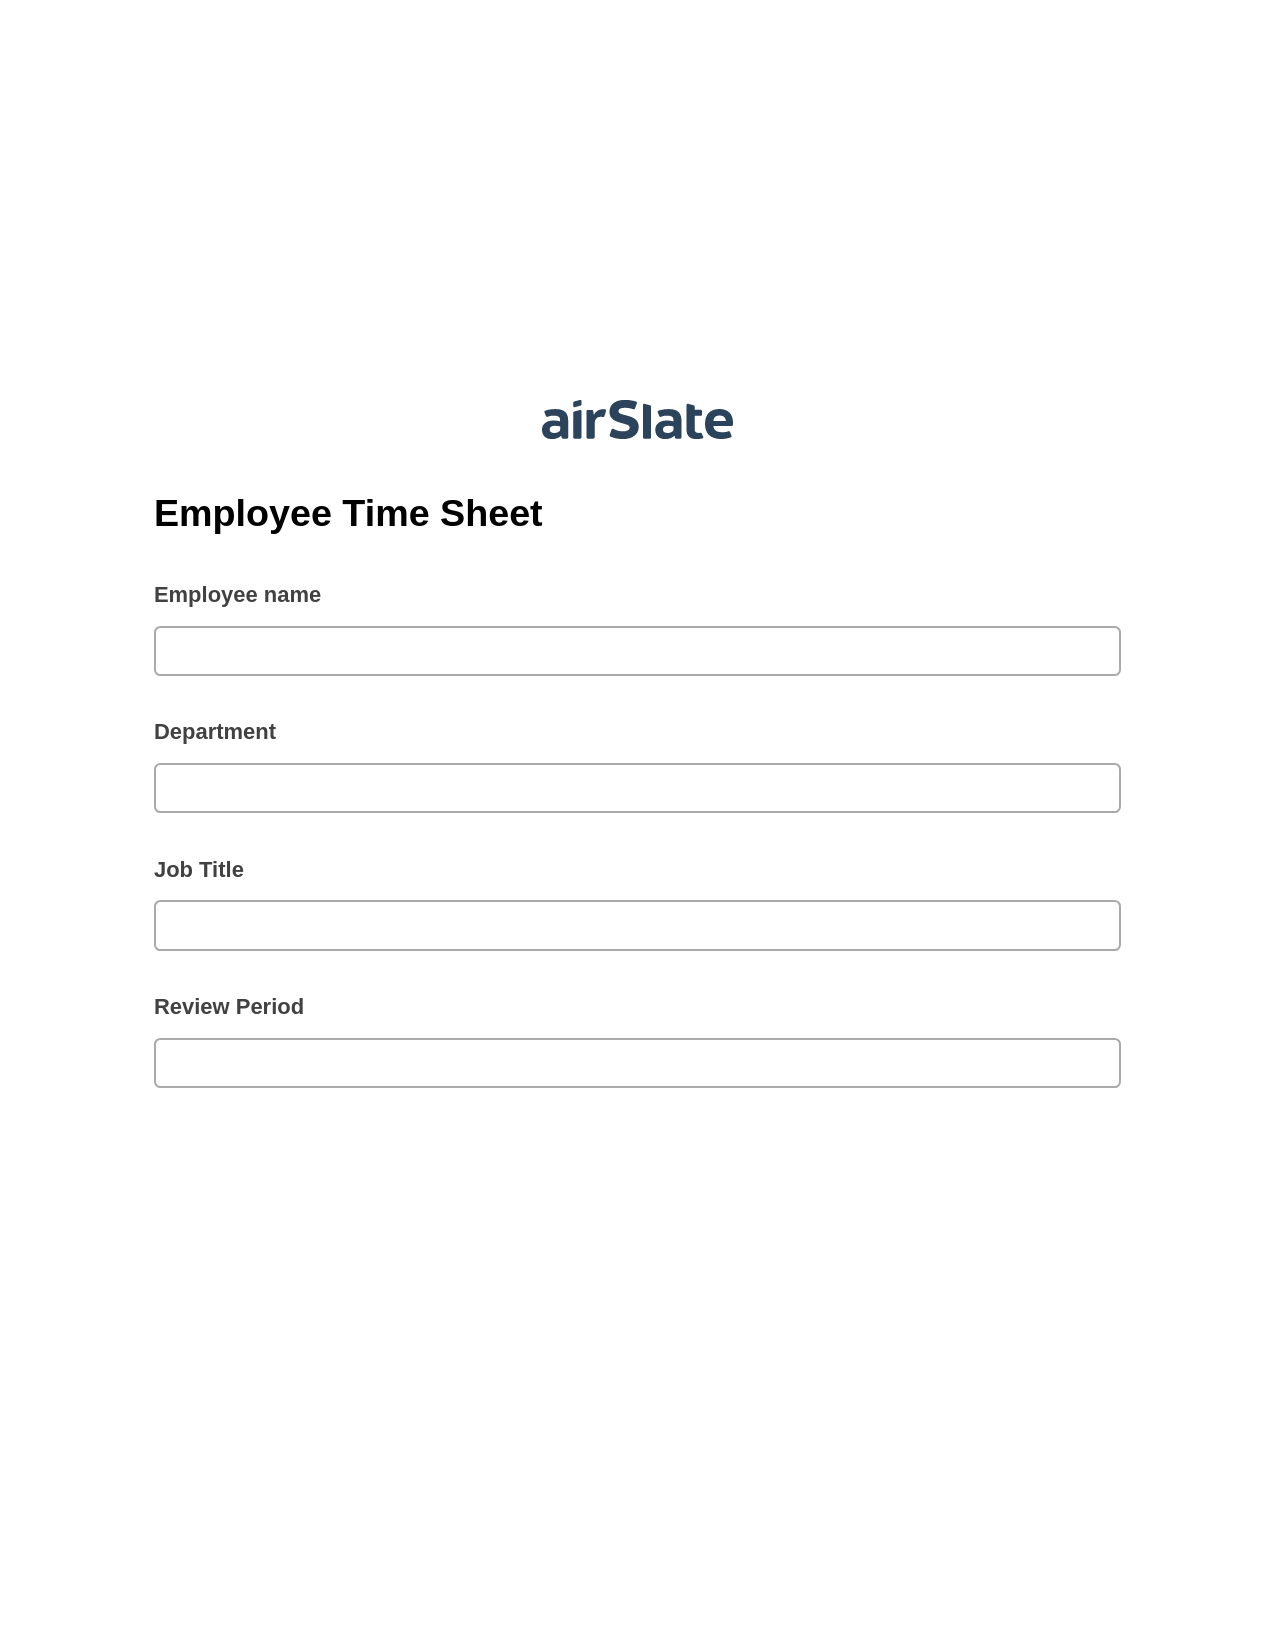 Multirole Employee Time Sheet Pre-fill Dropdowns from CSV file Bot, Create slate addon, Archive to Google Drive Bot